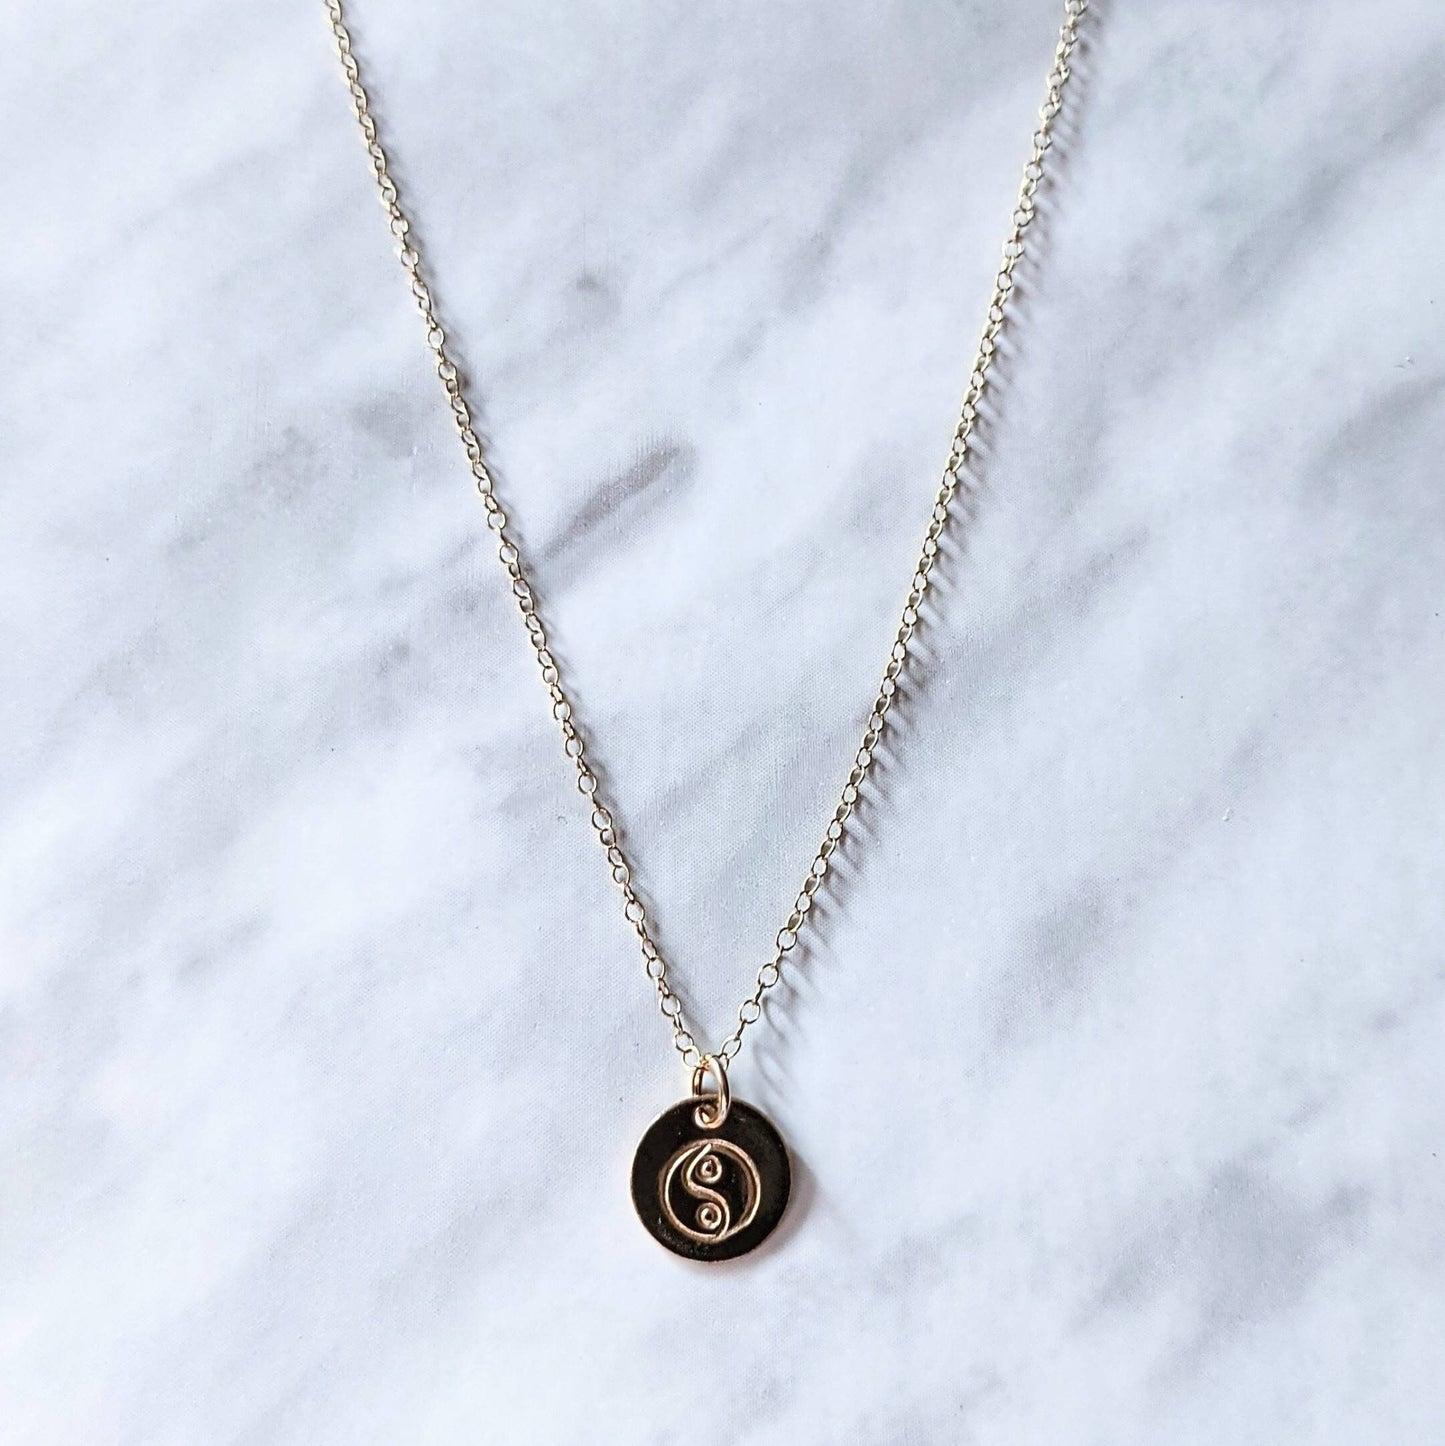 Gold Charm Necklaces